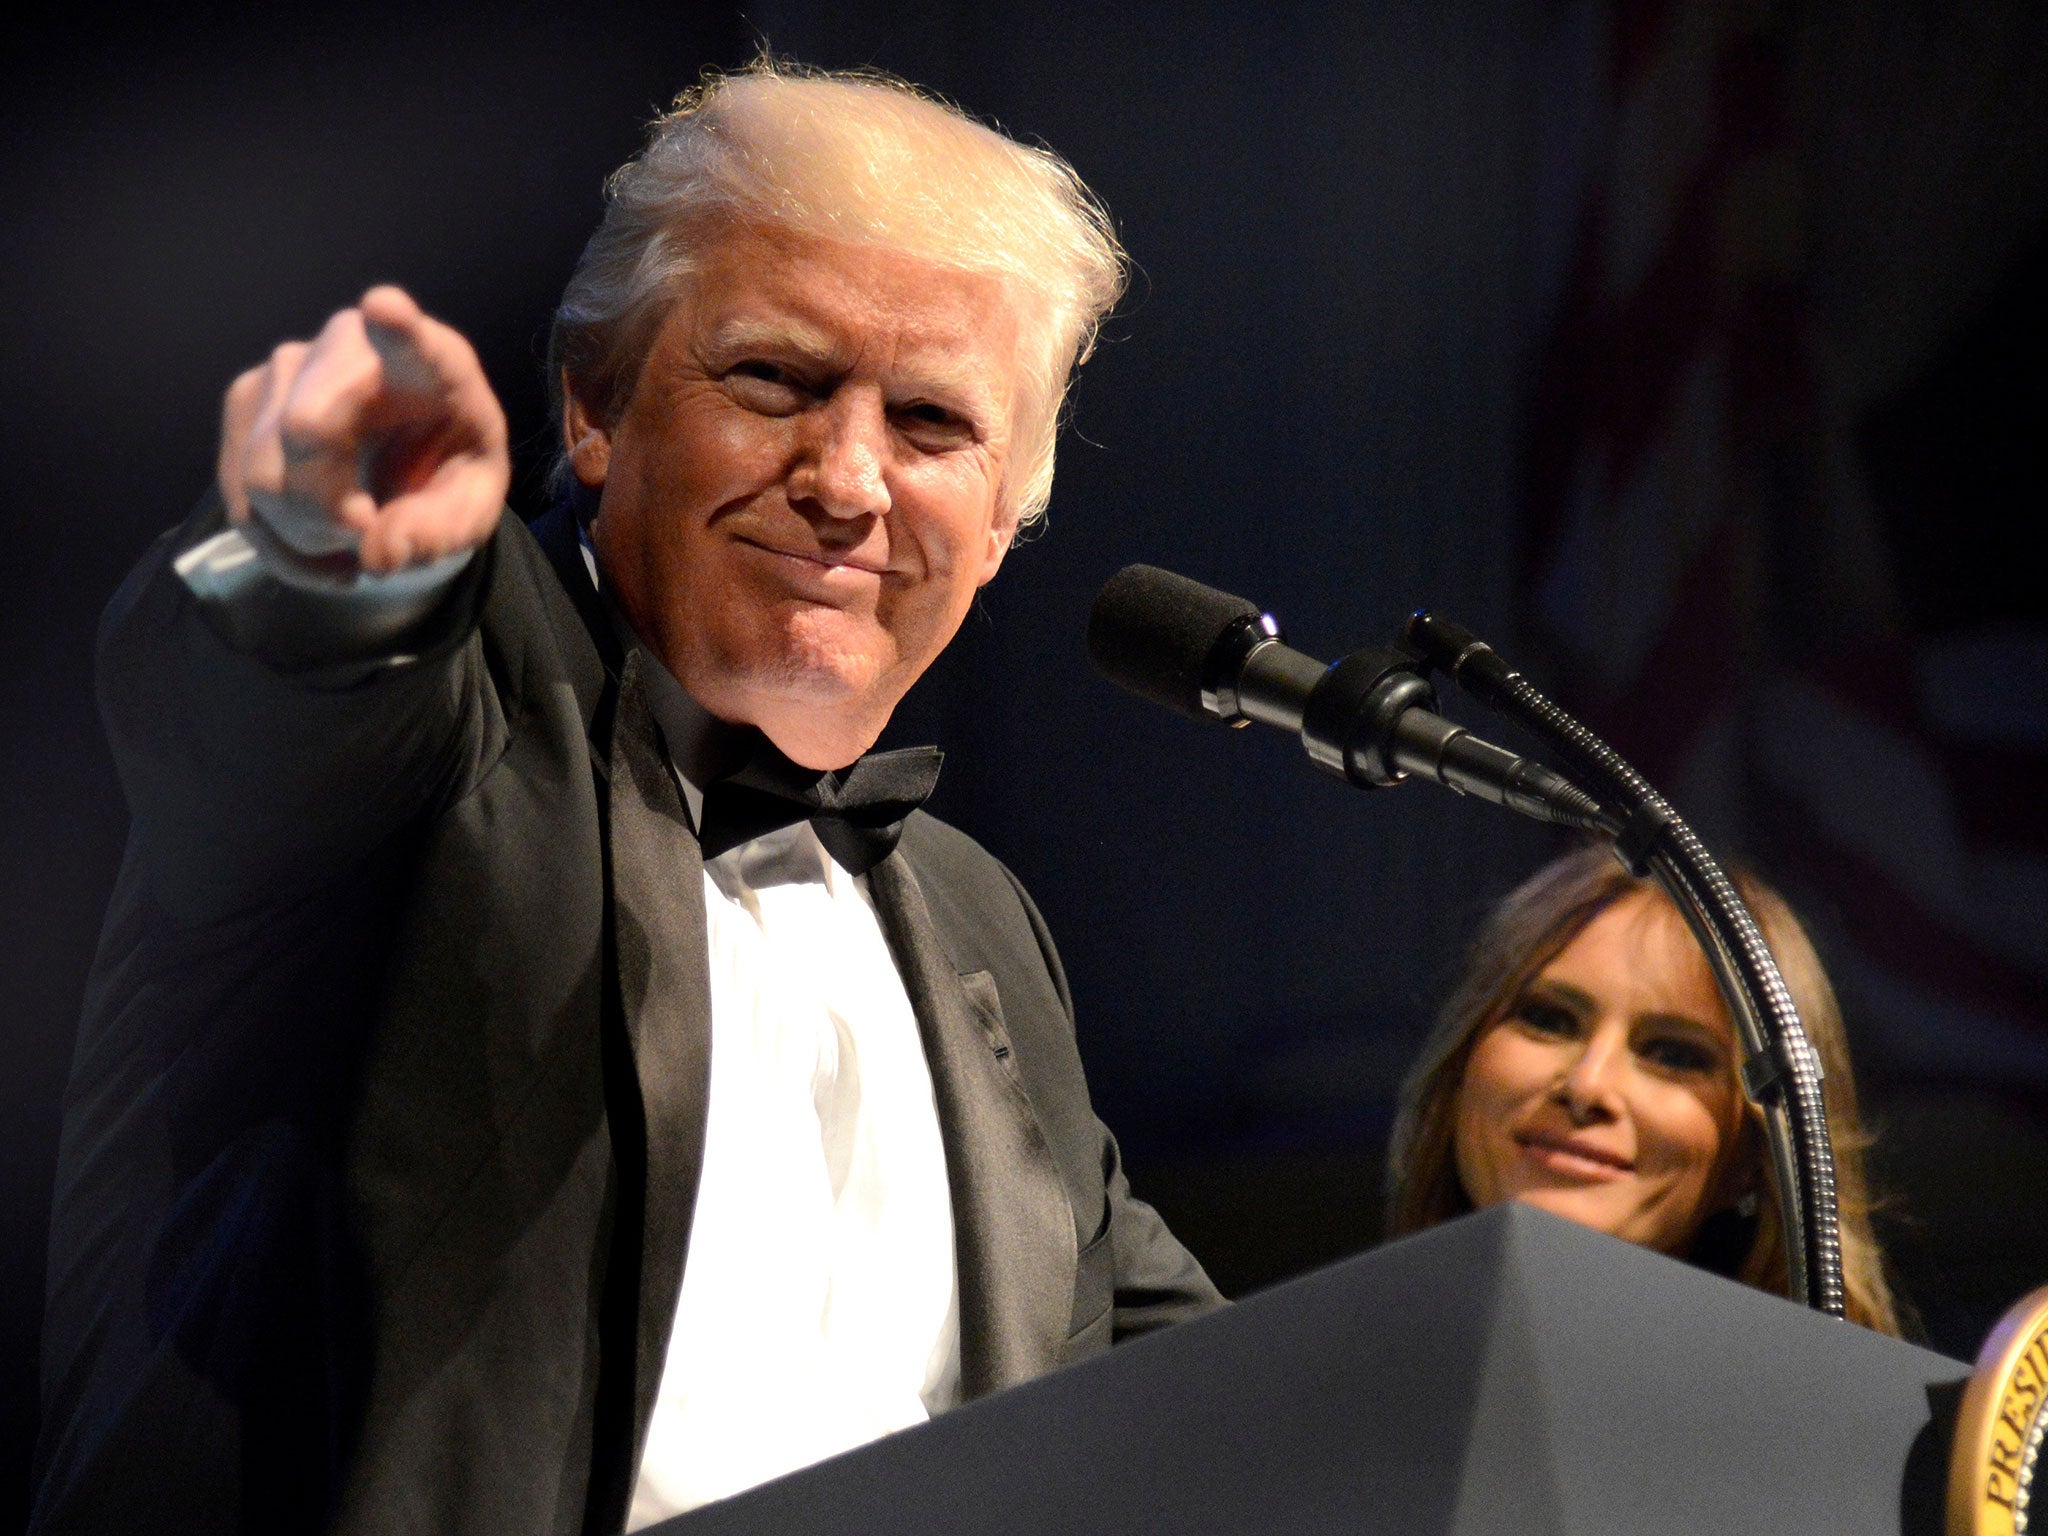 President Donald Trump addresses the Ford's Theatre Gala, an annual charity event to honor the legacy of President Abraham Lincoln, in Washington